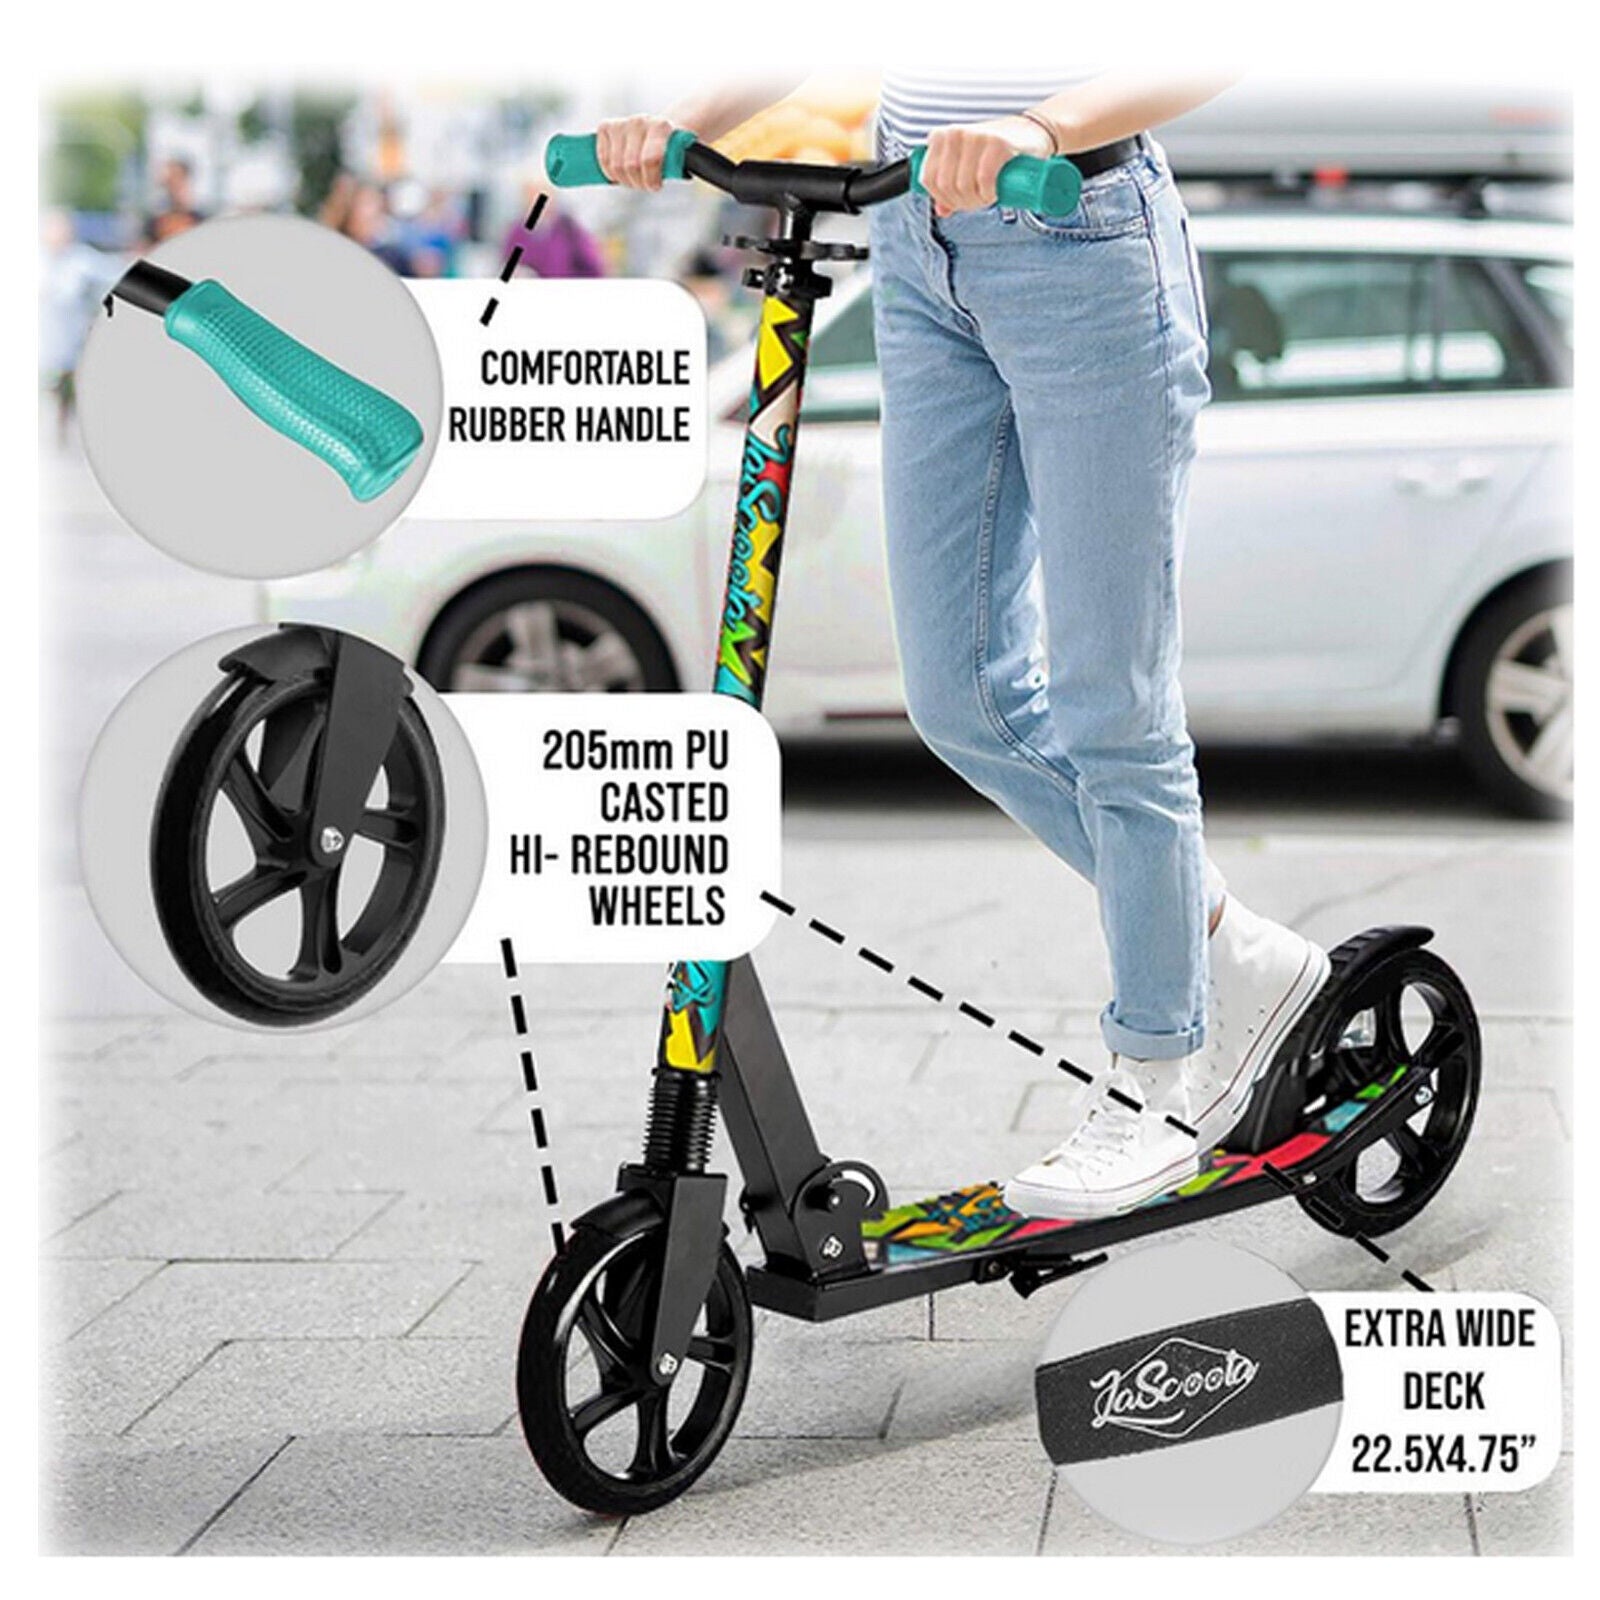 Pulse Kick Push Commuter Scooter Teen Adult Graphic Black